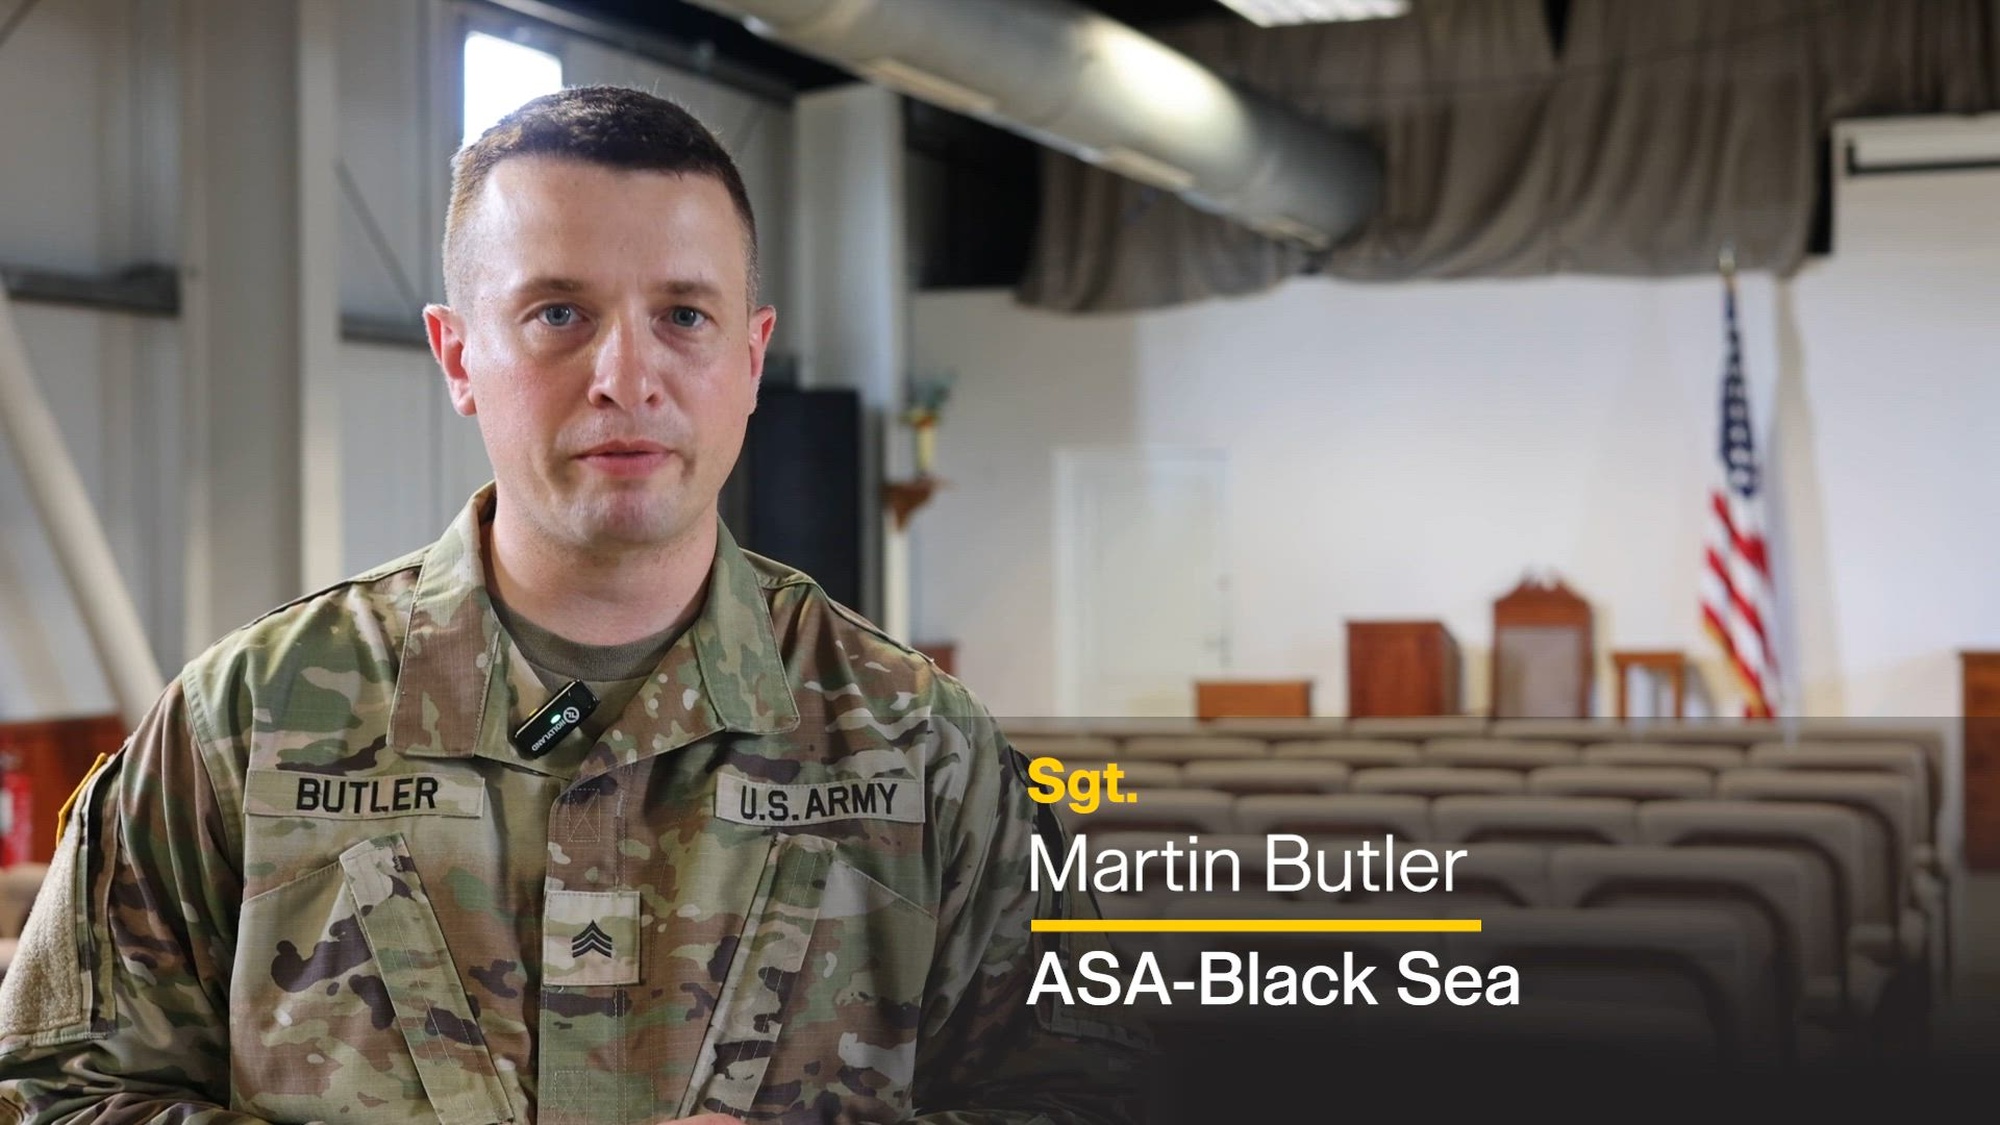 U.S. Army Soldiers talk about the important role chaplains on deployment at Mihail Kogălniceanu Air Base, Romania, June 27, 2024. Chaplains provide spiritual guidance and support to military personnel of various faiths, helping to maintain morale and resilience in high-stress environments. (U.S. Army video by Spc. Joshua Maxie)